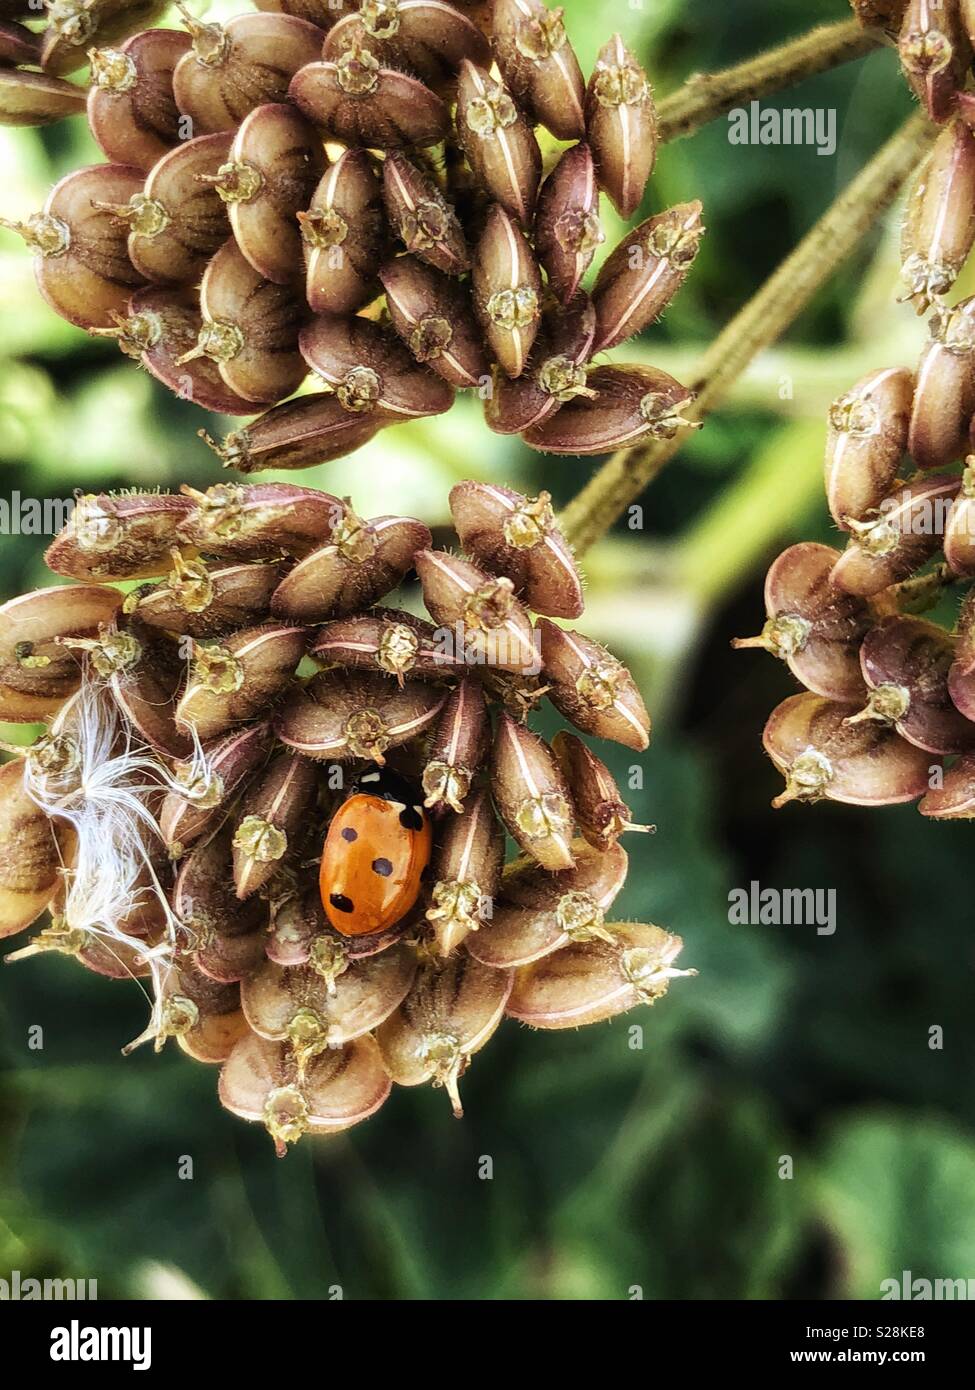 Ladybird on the seed head of a plant Stock Photo